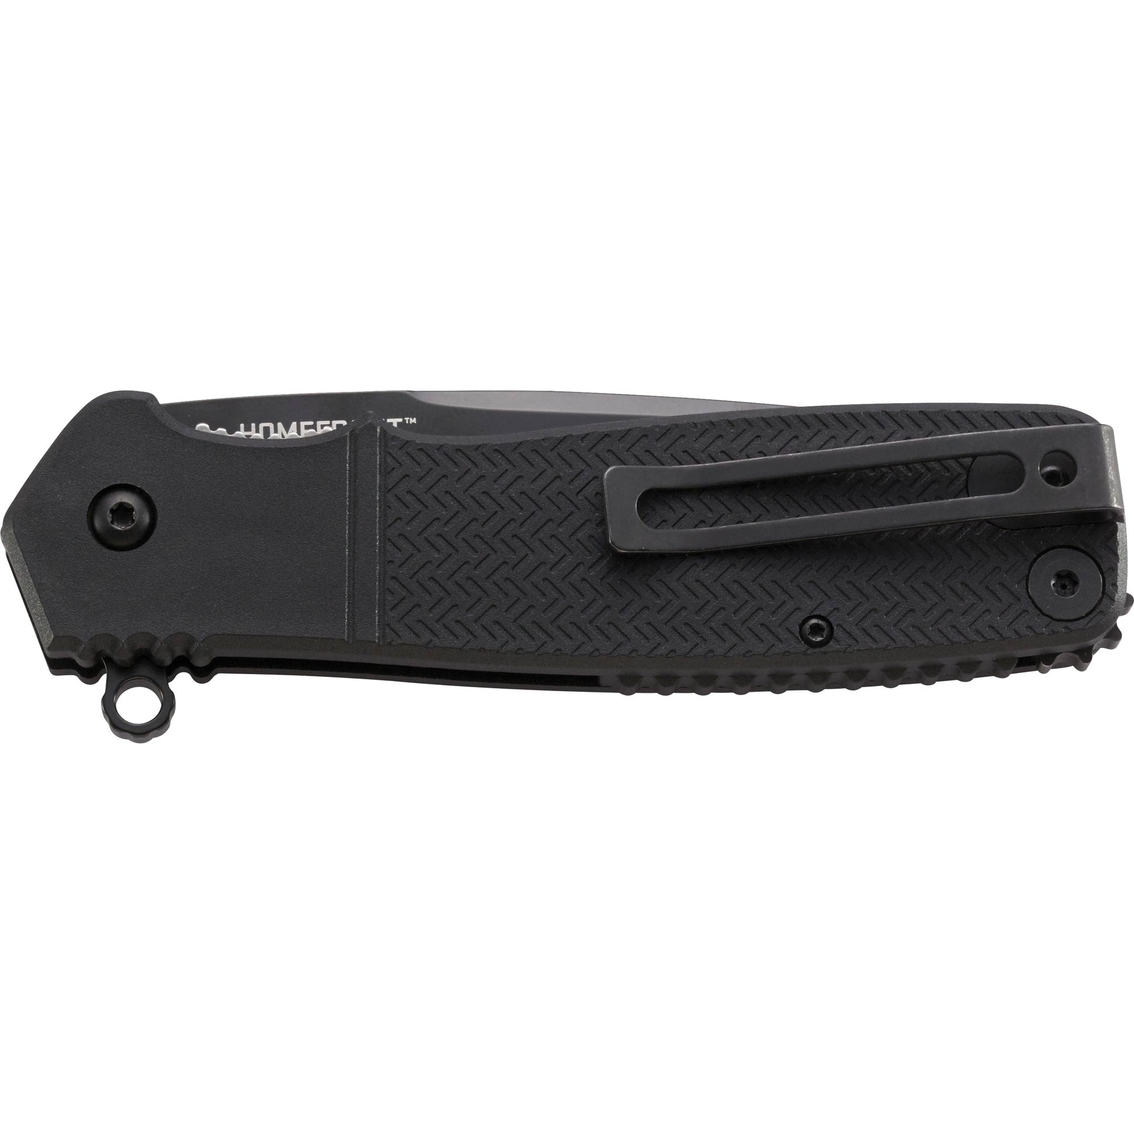 Columbia River Knife & Tool Homefront Tactical Clip Folder Knife - Image 2 of 4